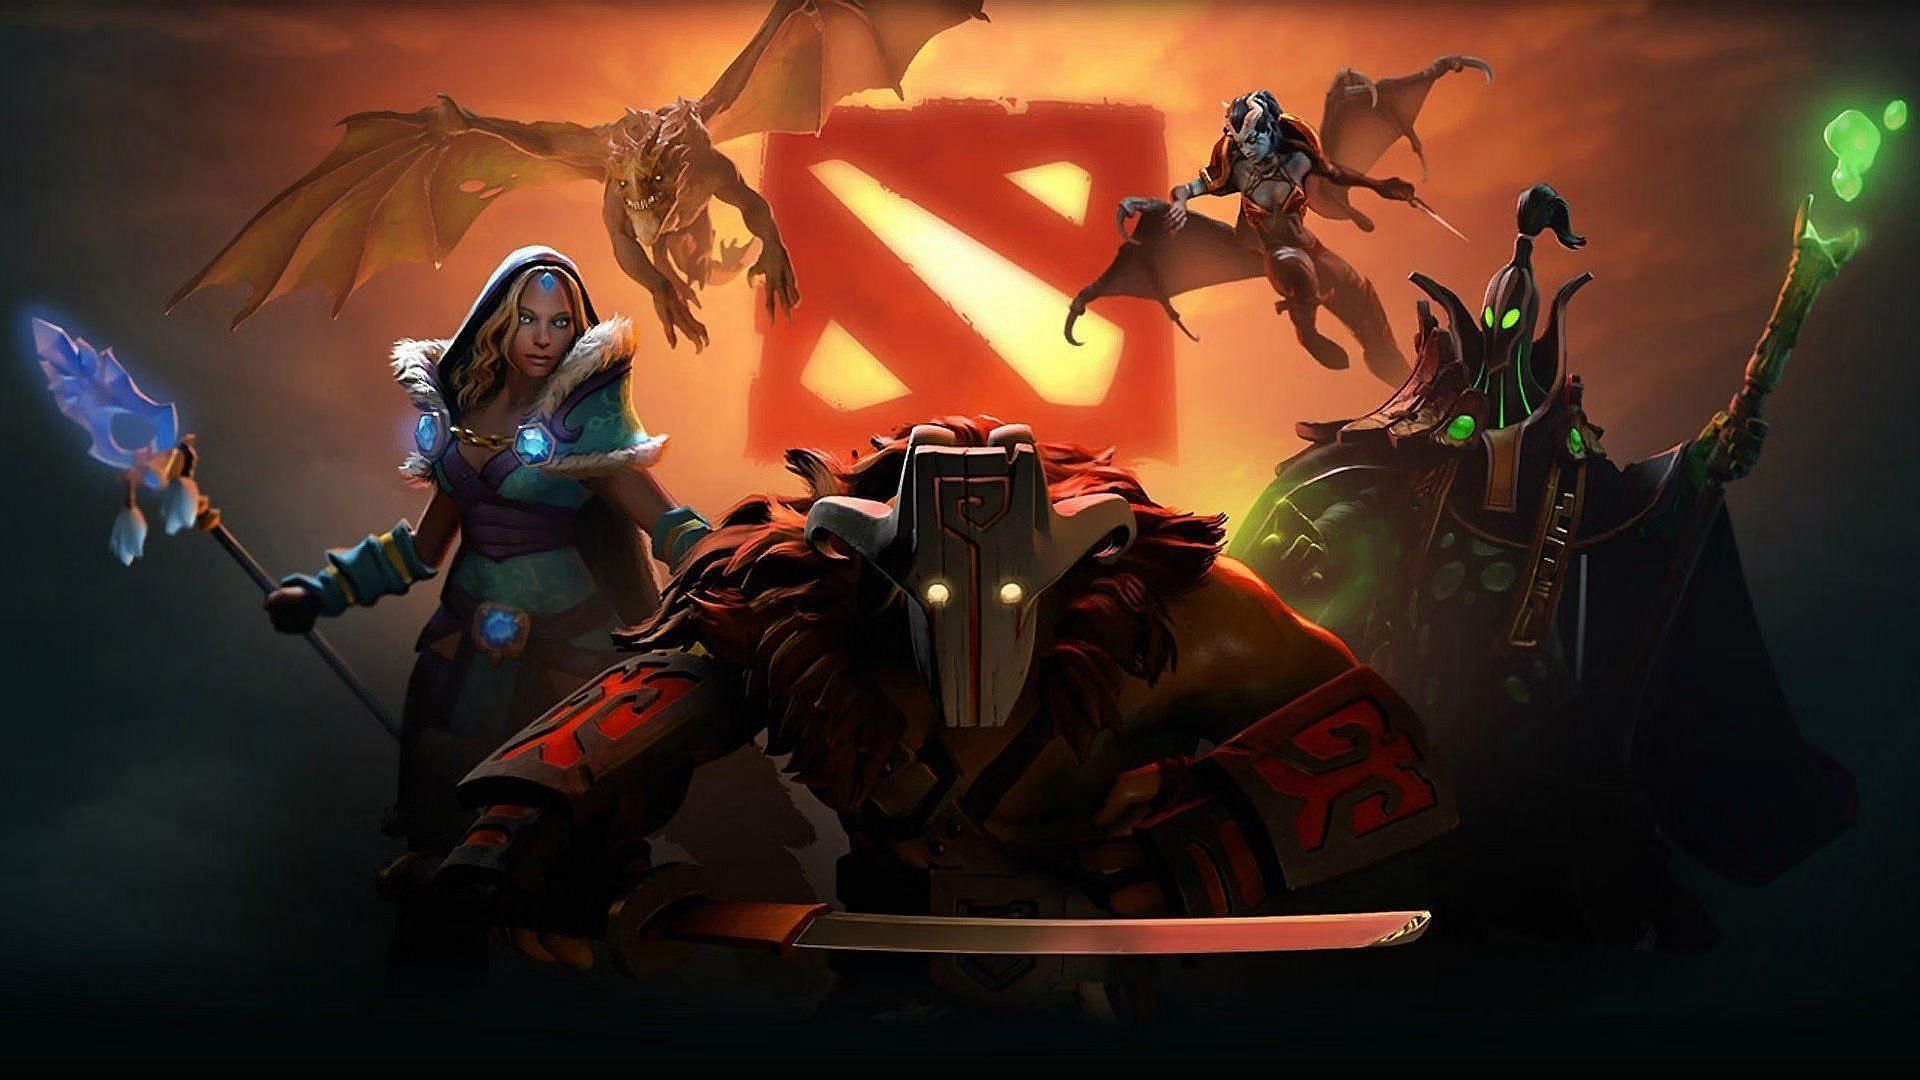 Juggernaut, Crystal Maiden, Rubick, Queen of Pain, and Dragon Knight (Image via Valve)